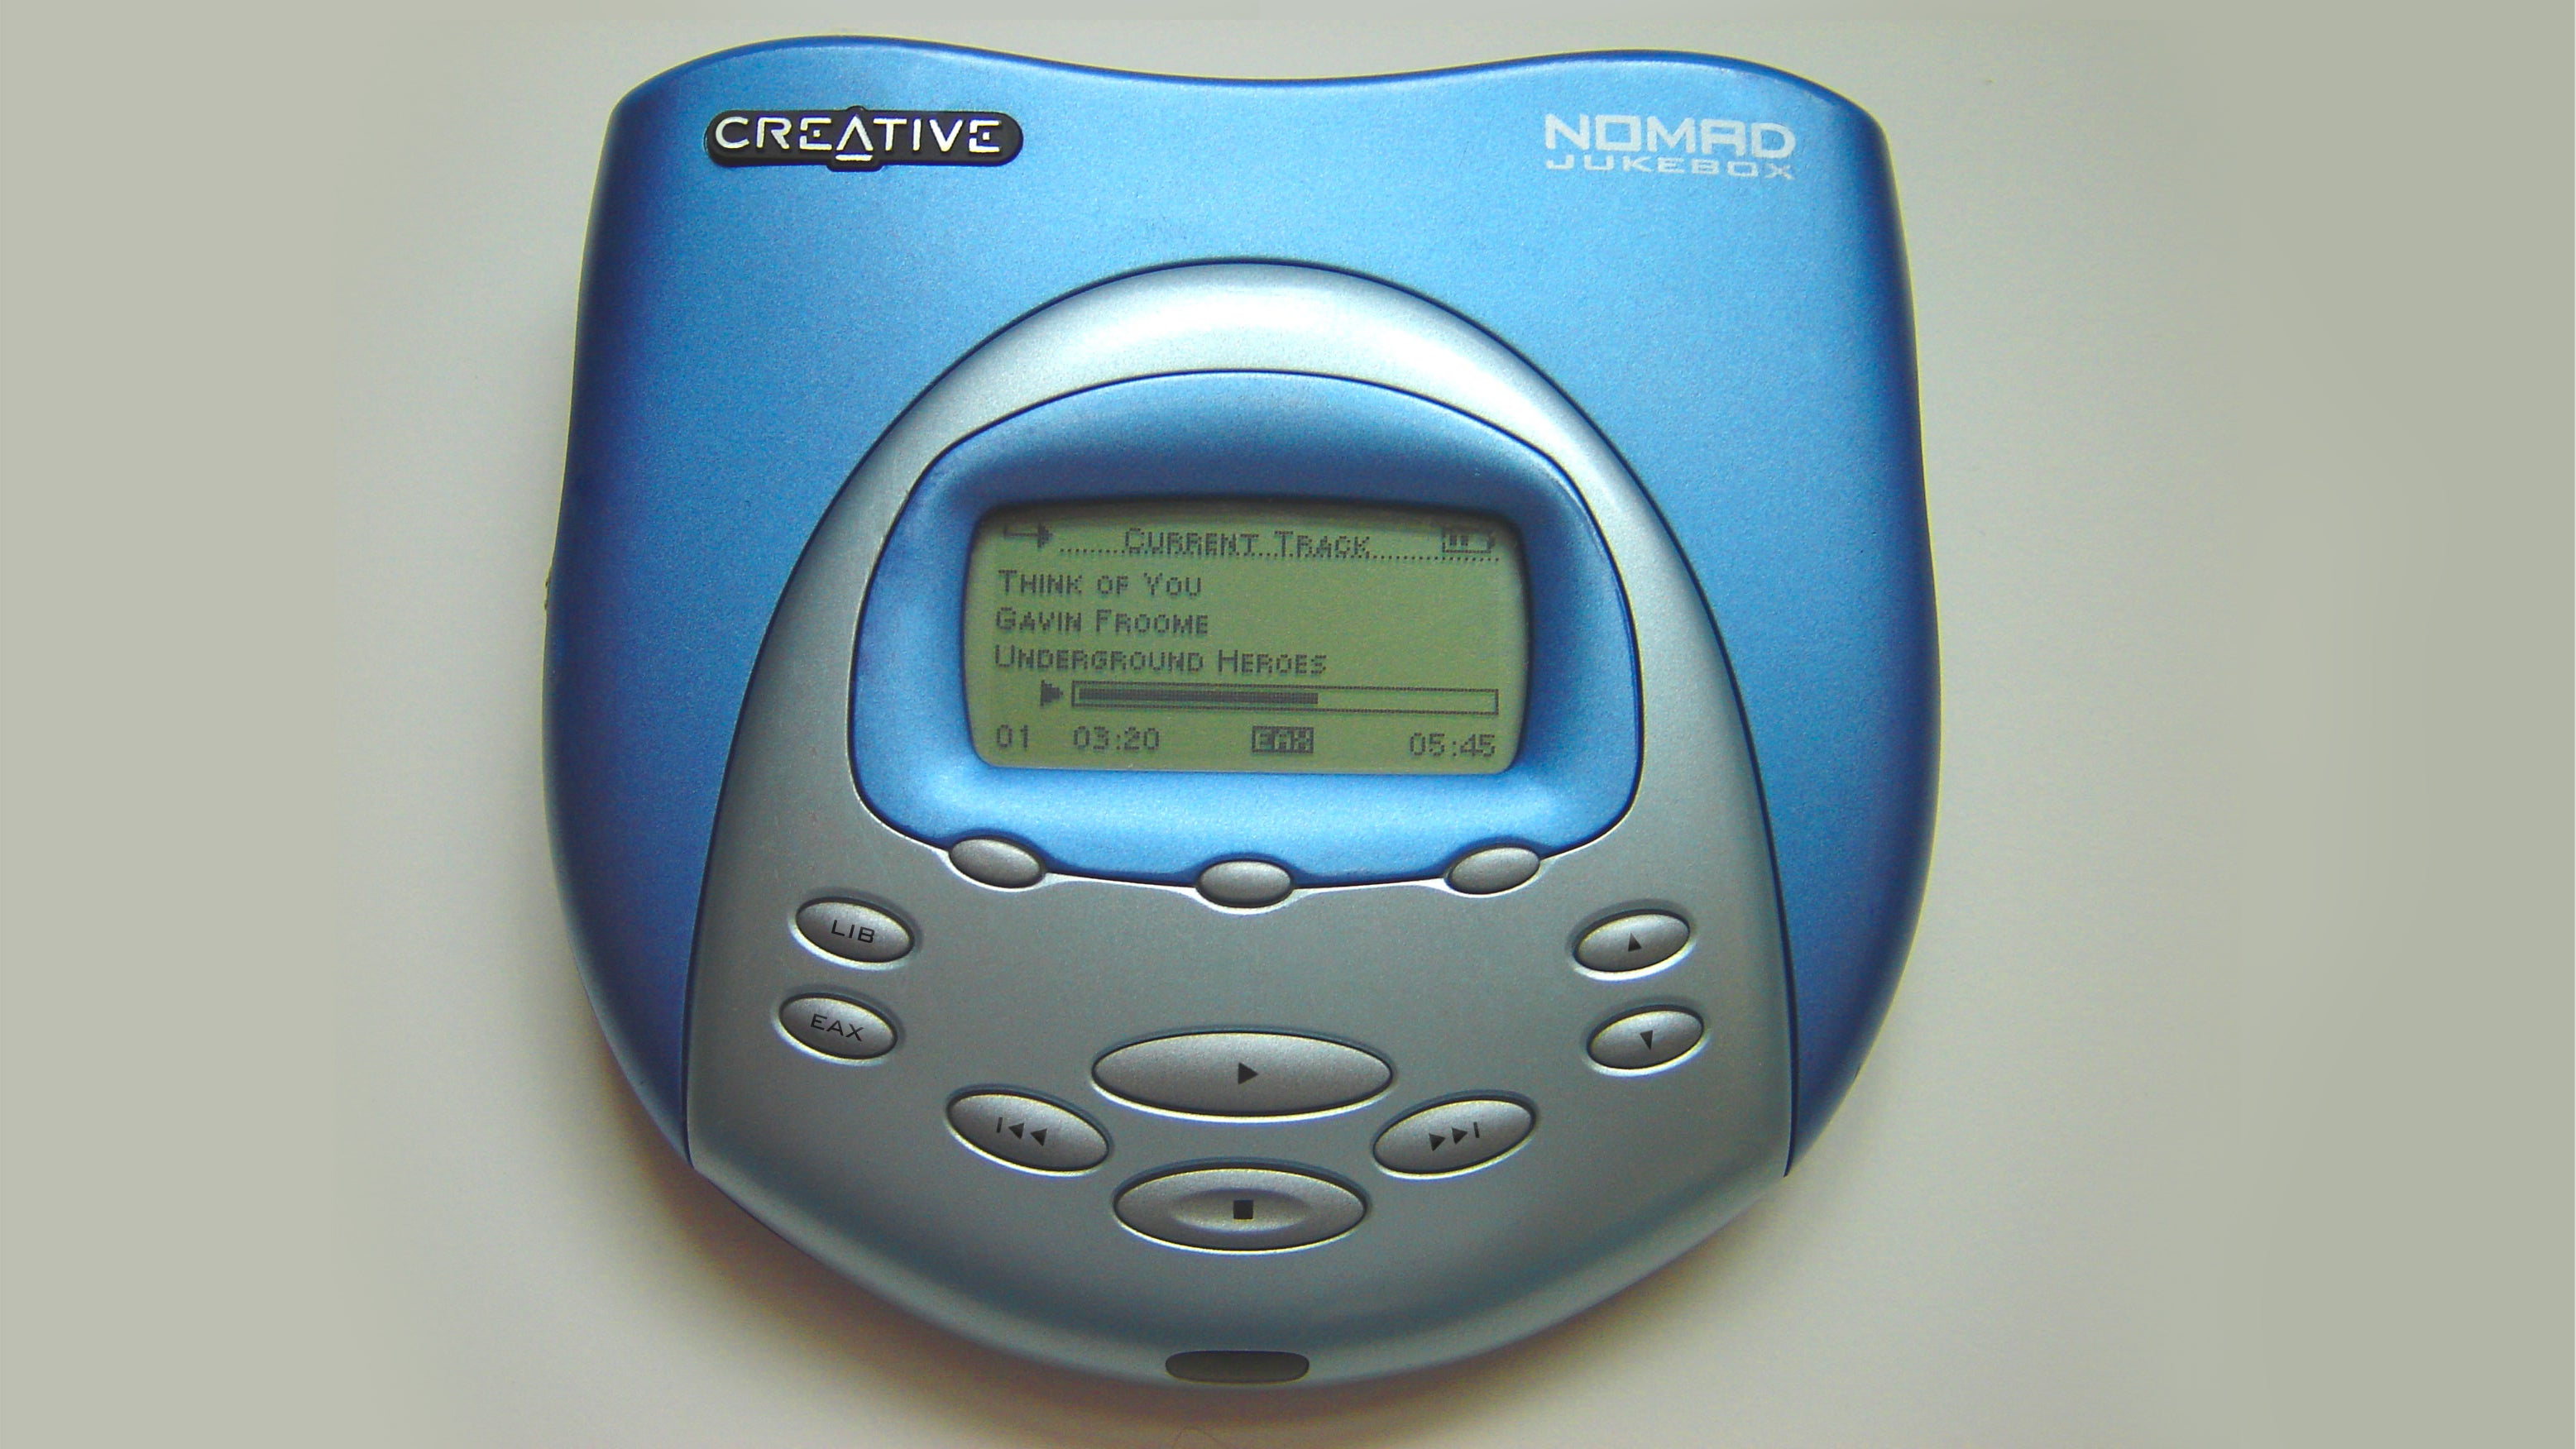 Winamp Is Back From the Dead, but These Classic MP3 Players Are Sadly Gone for Good